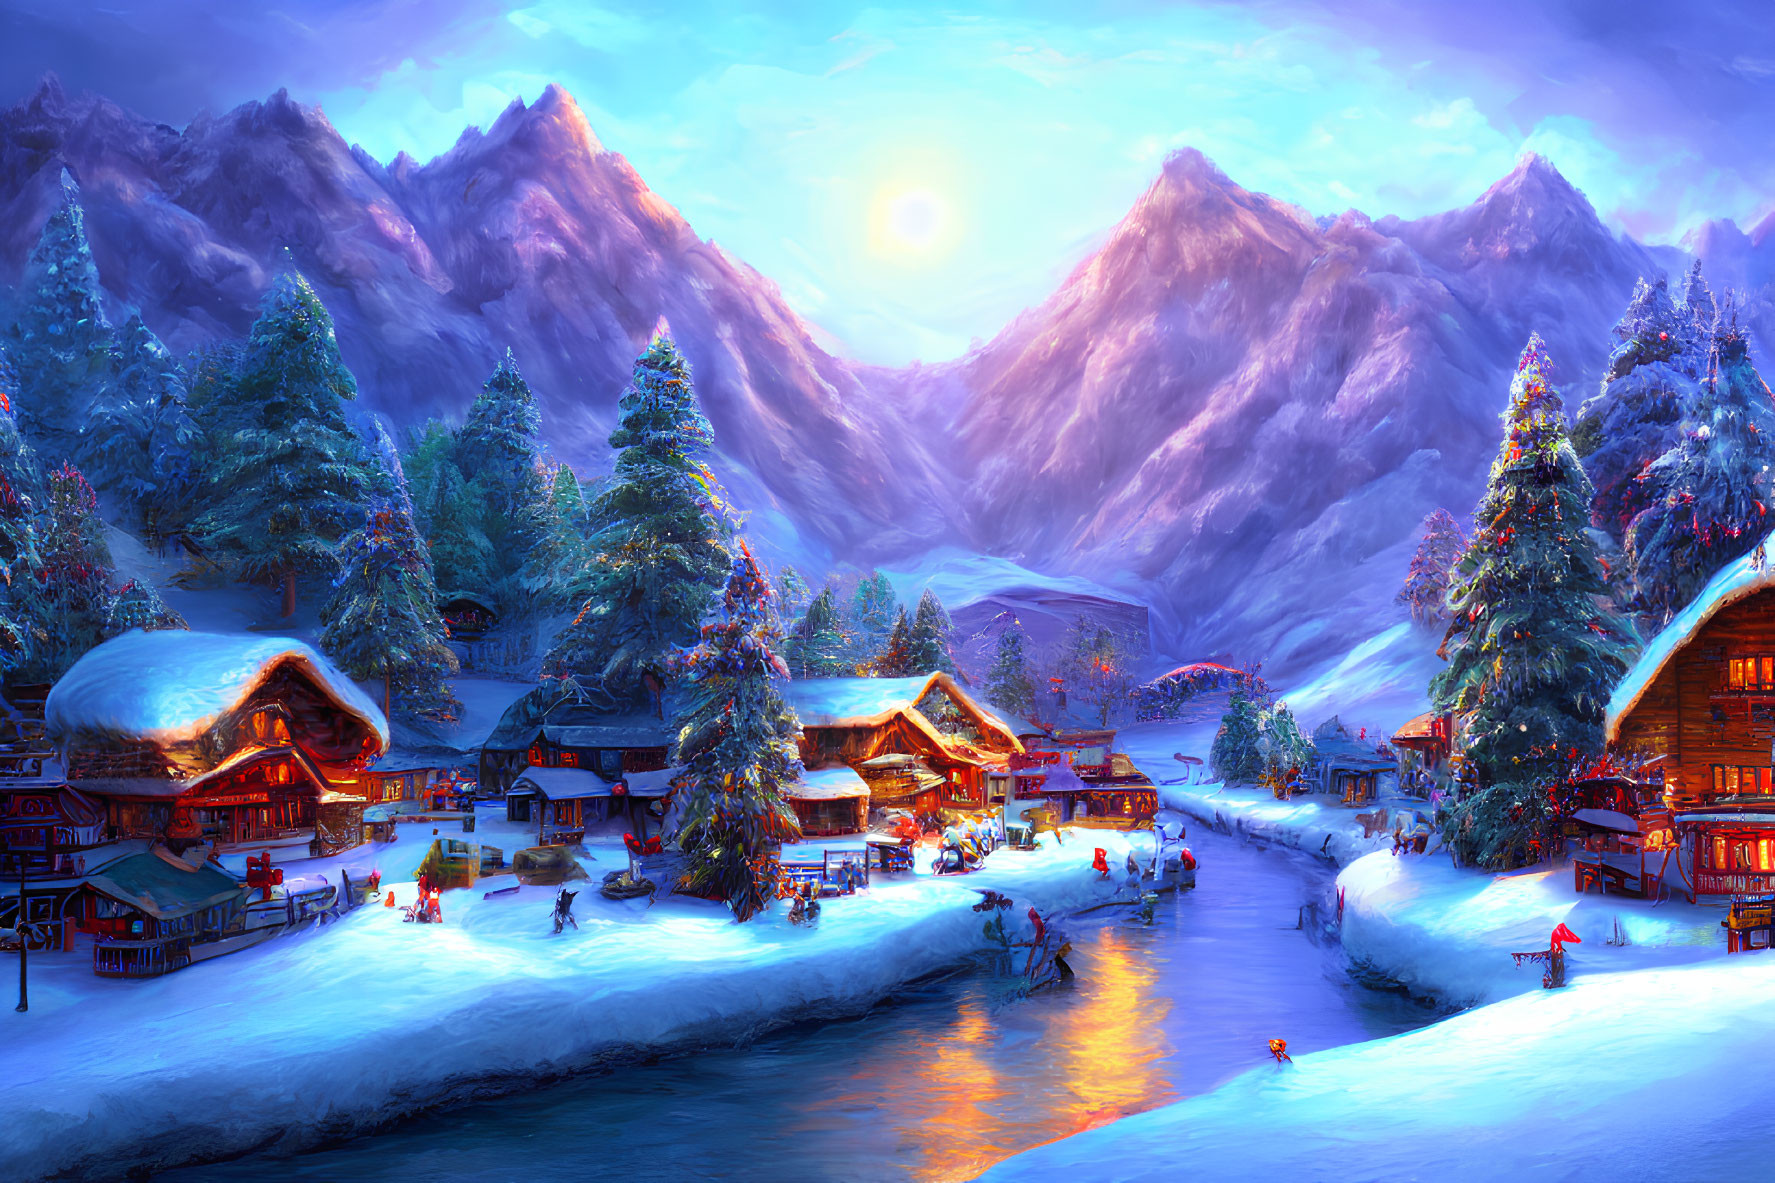 Scenic winter village with snow-covered cottages and mountains